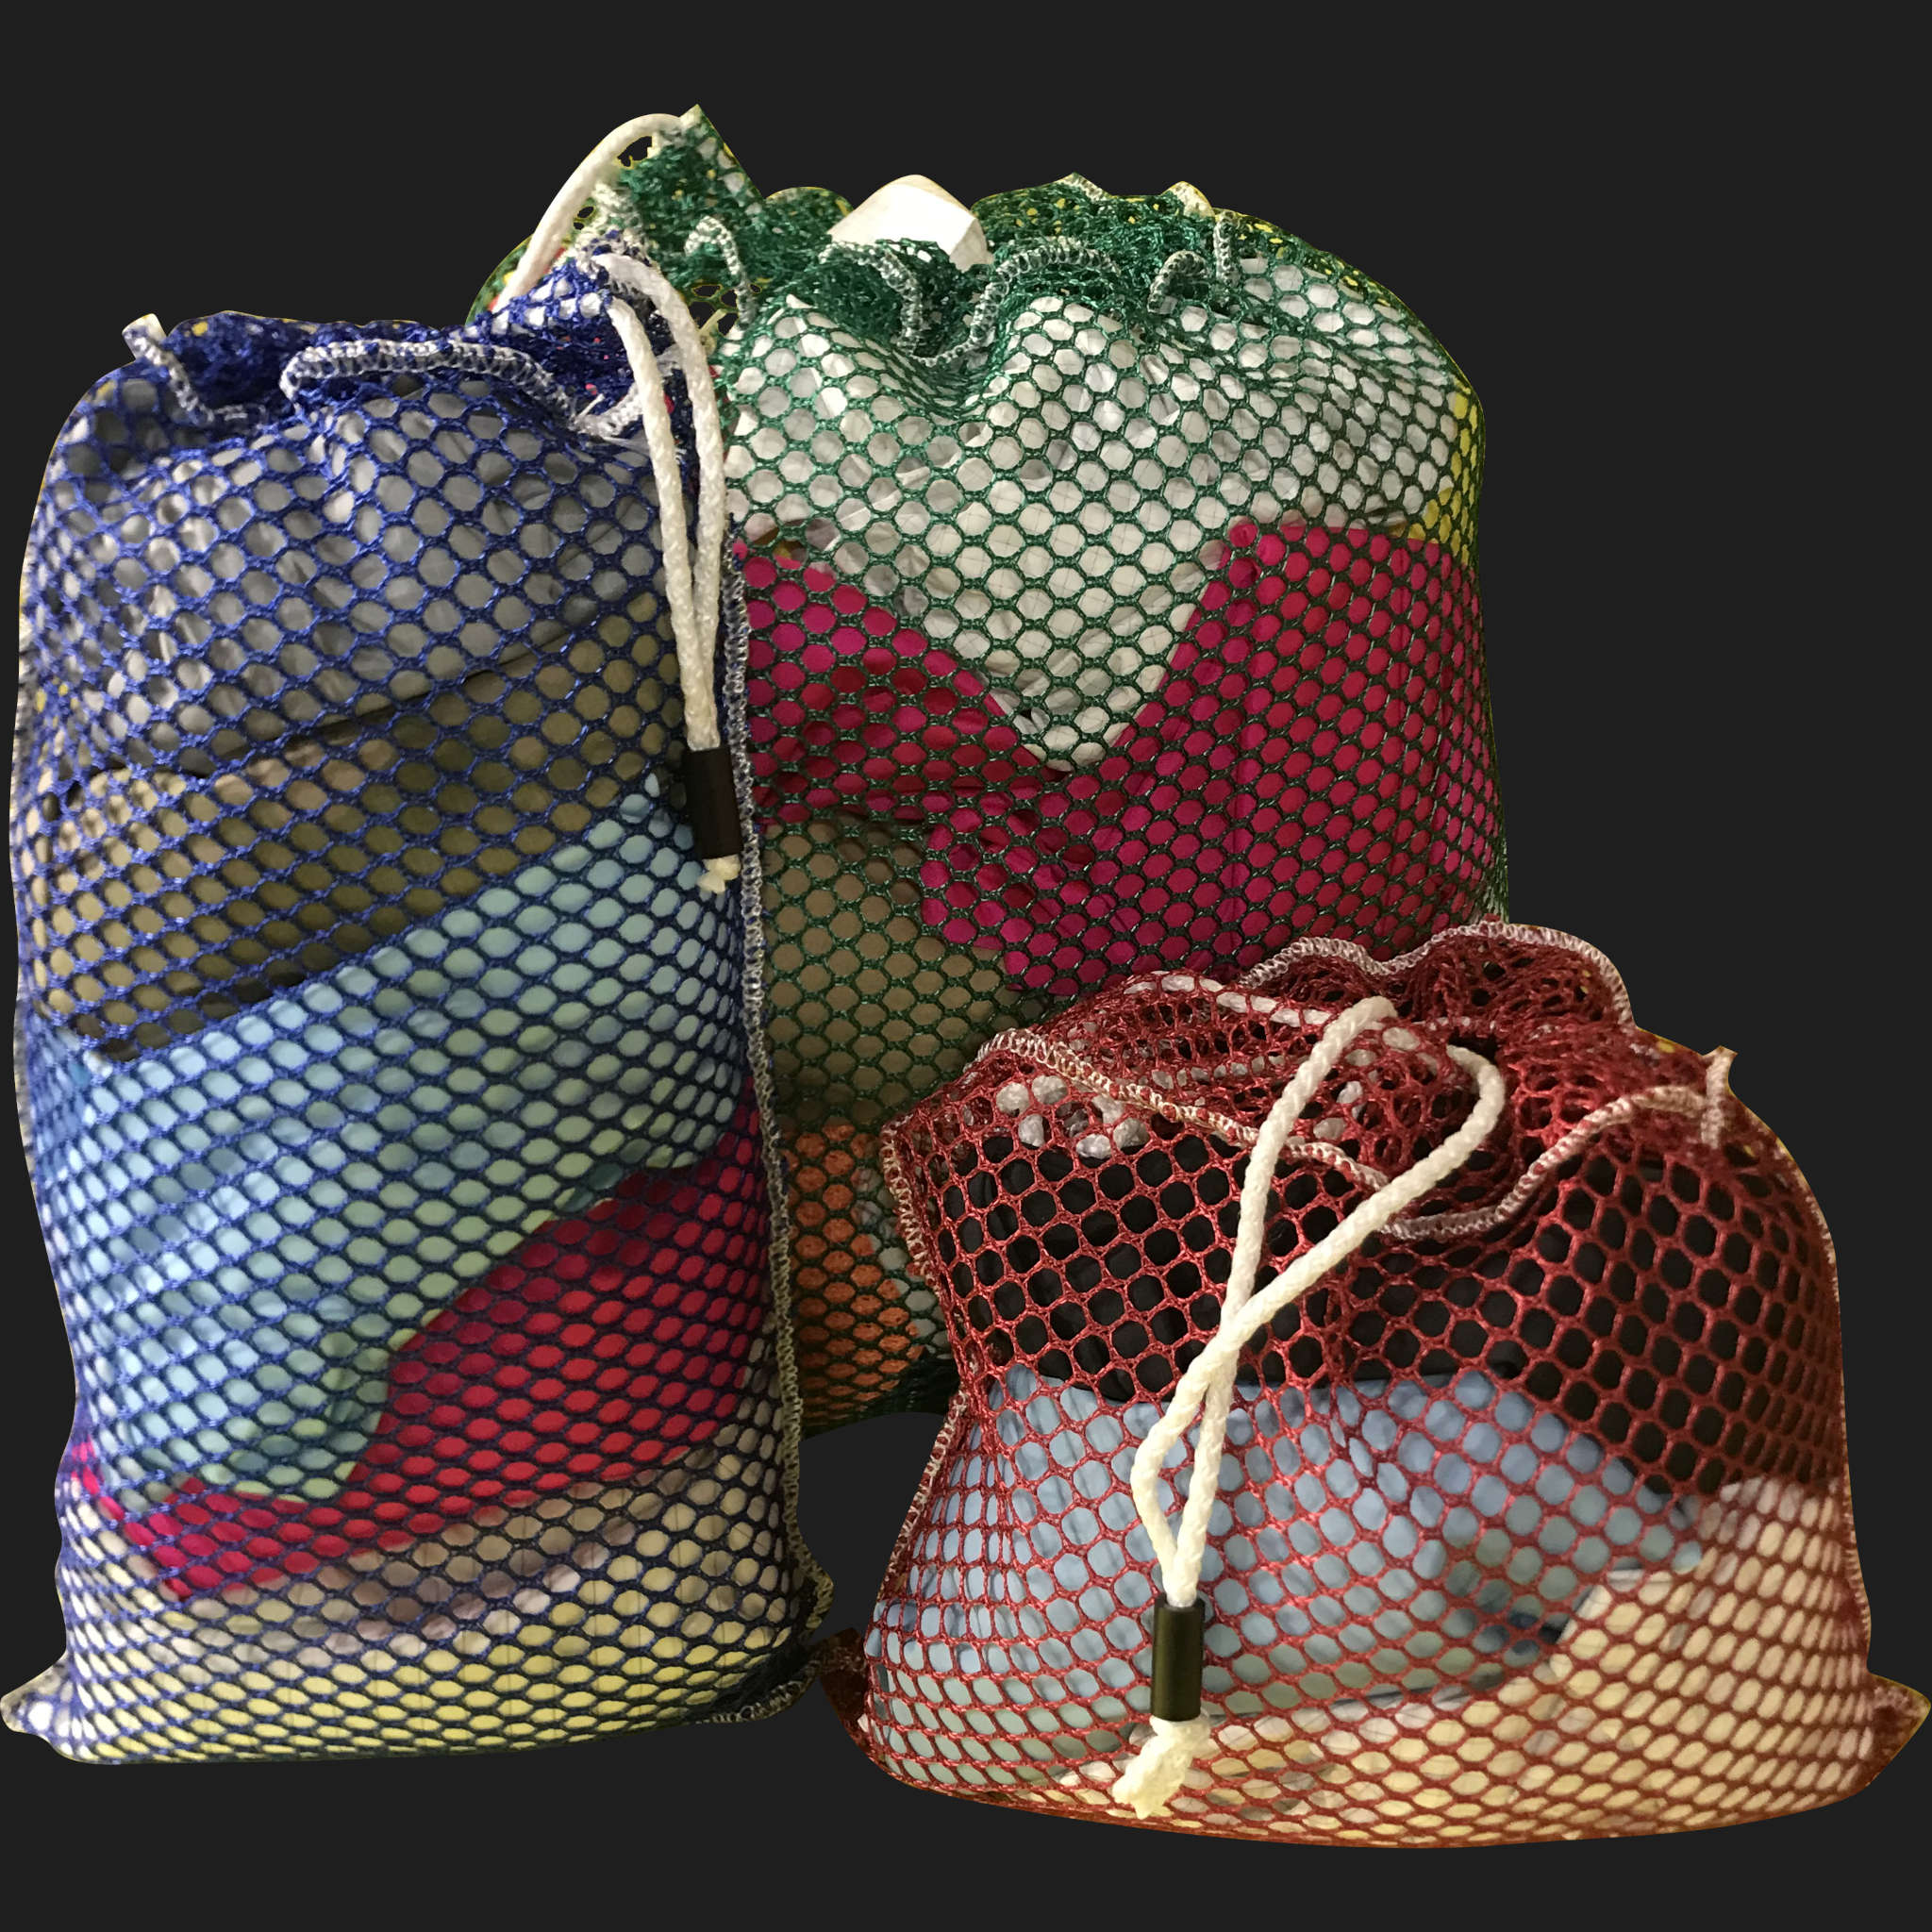 18" x 22" Customized Mesh-Net-Laundry Bags Heavy Duty with Cord and barrellock closure